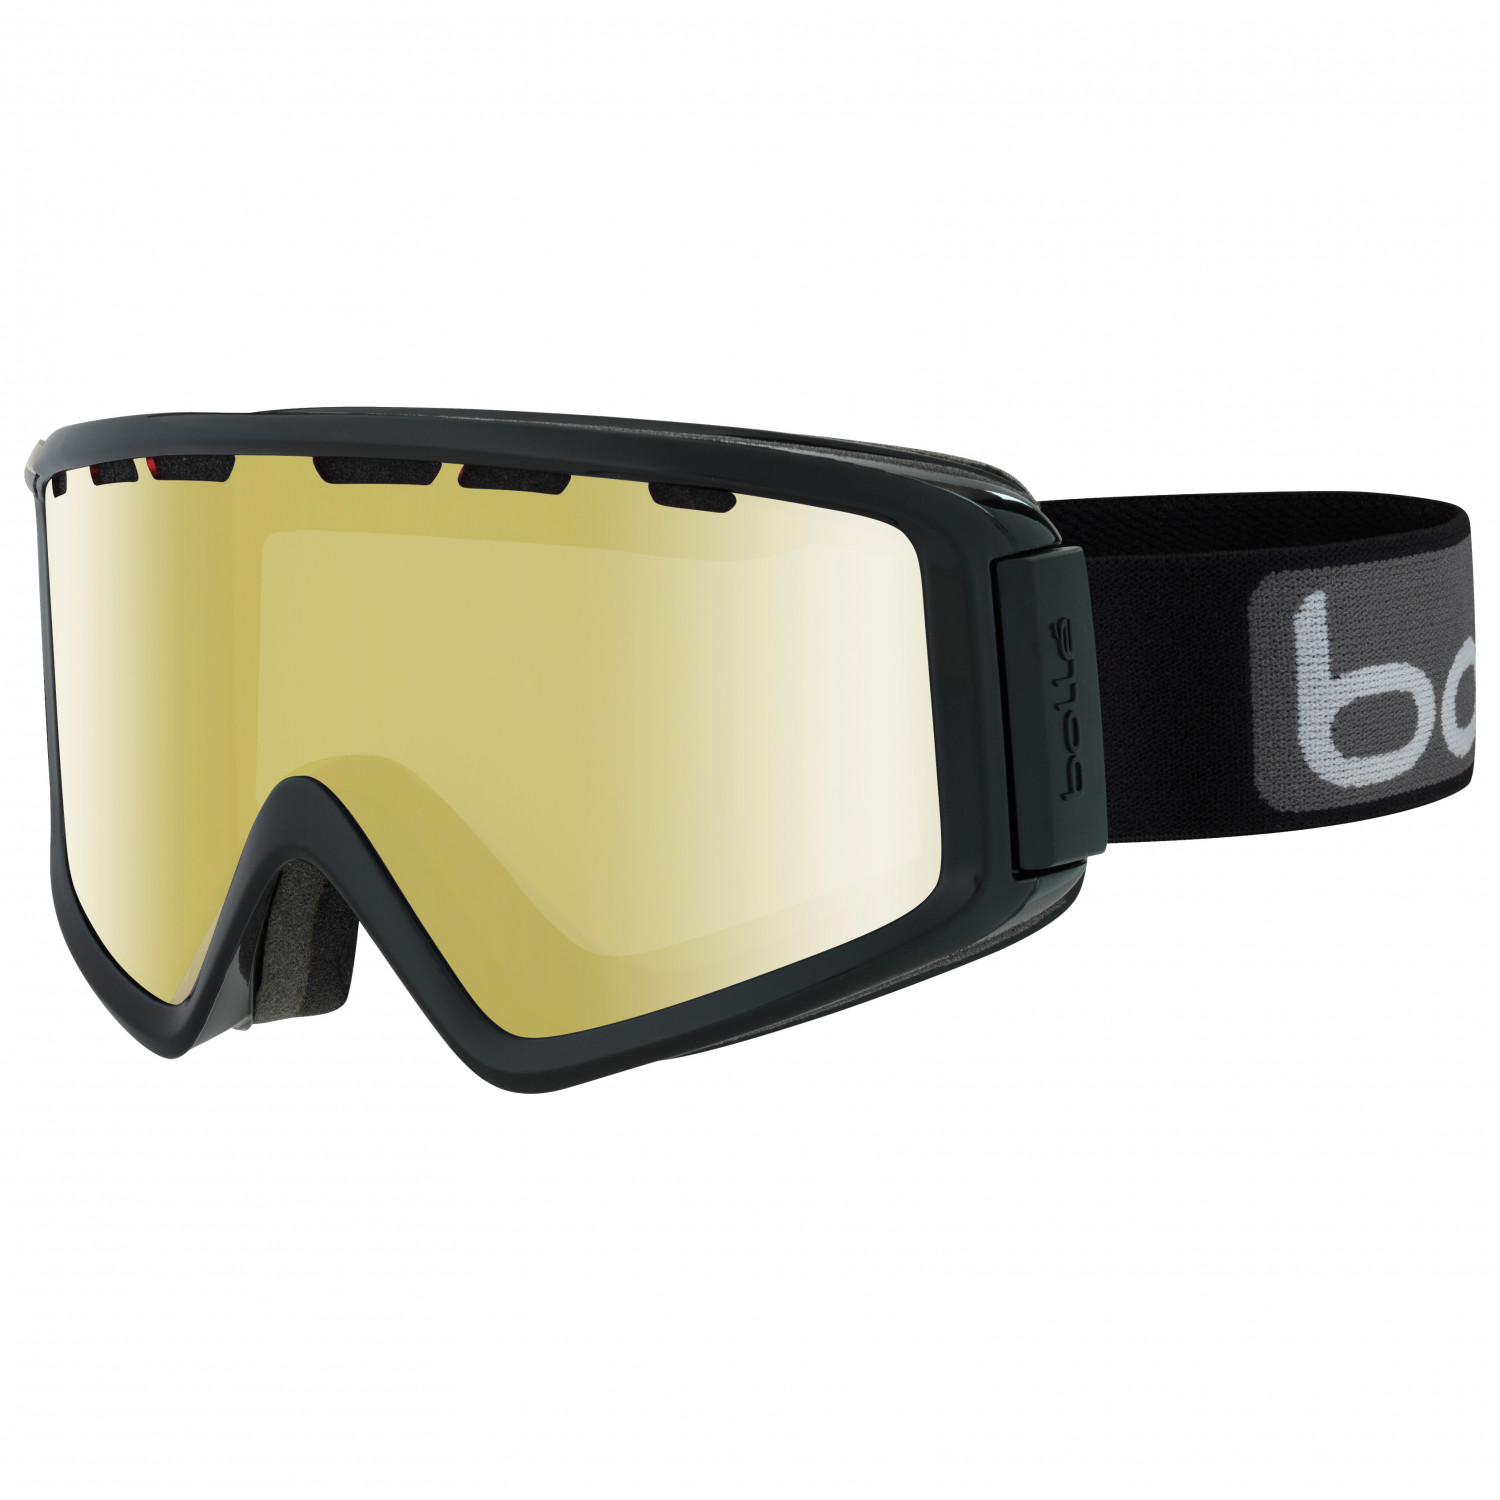 BOLLE GOGGLE Z5 OTG S1-3